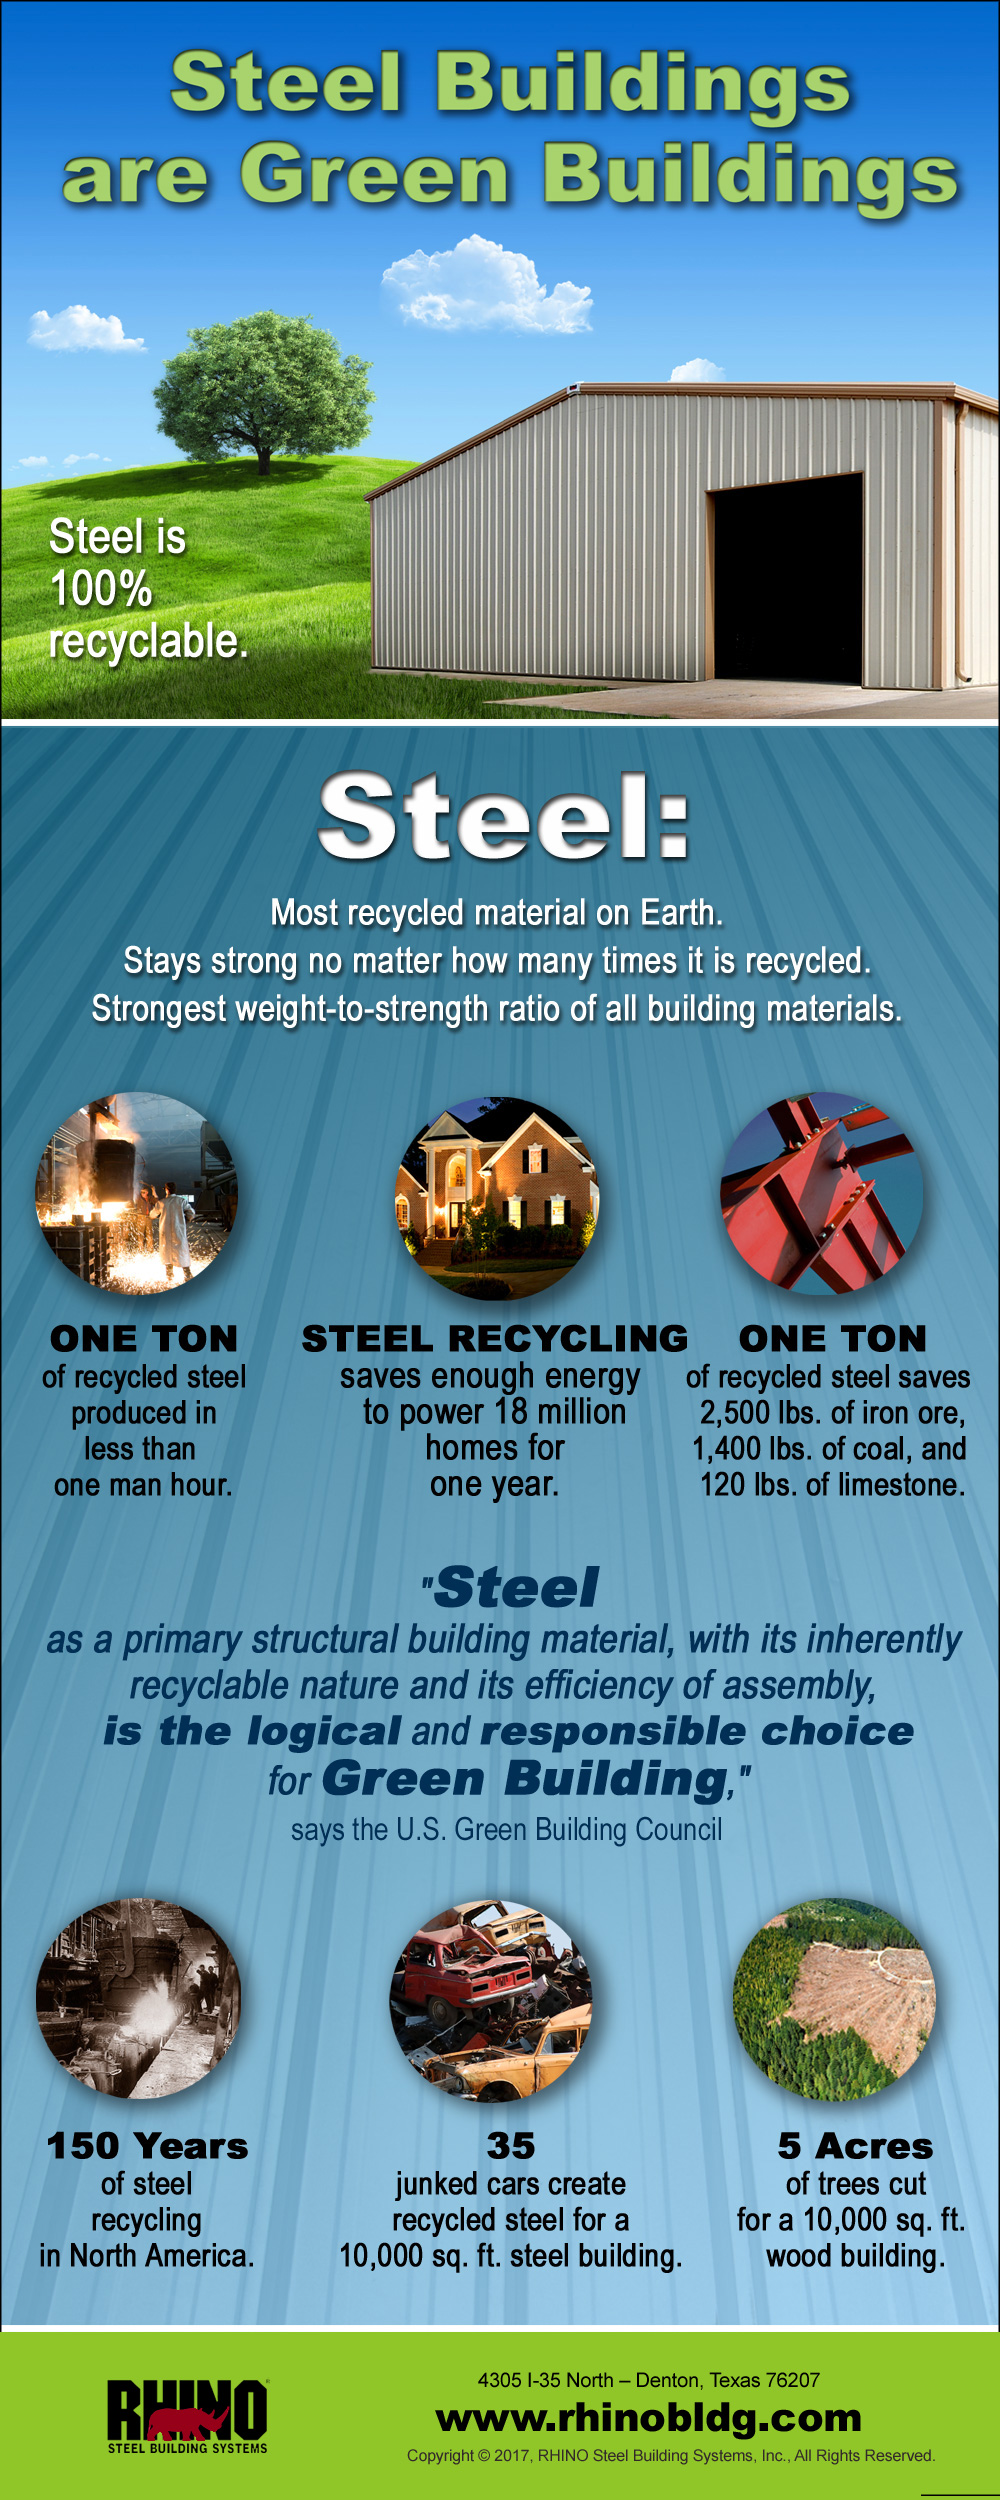 Infographic showing the green building advantages of steel.